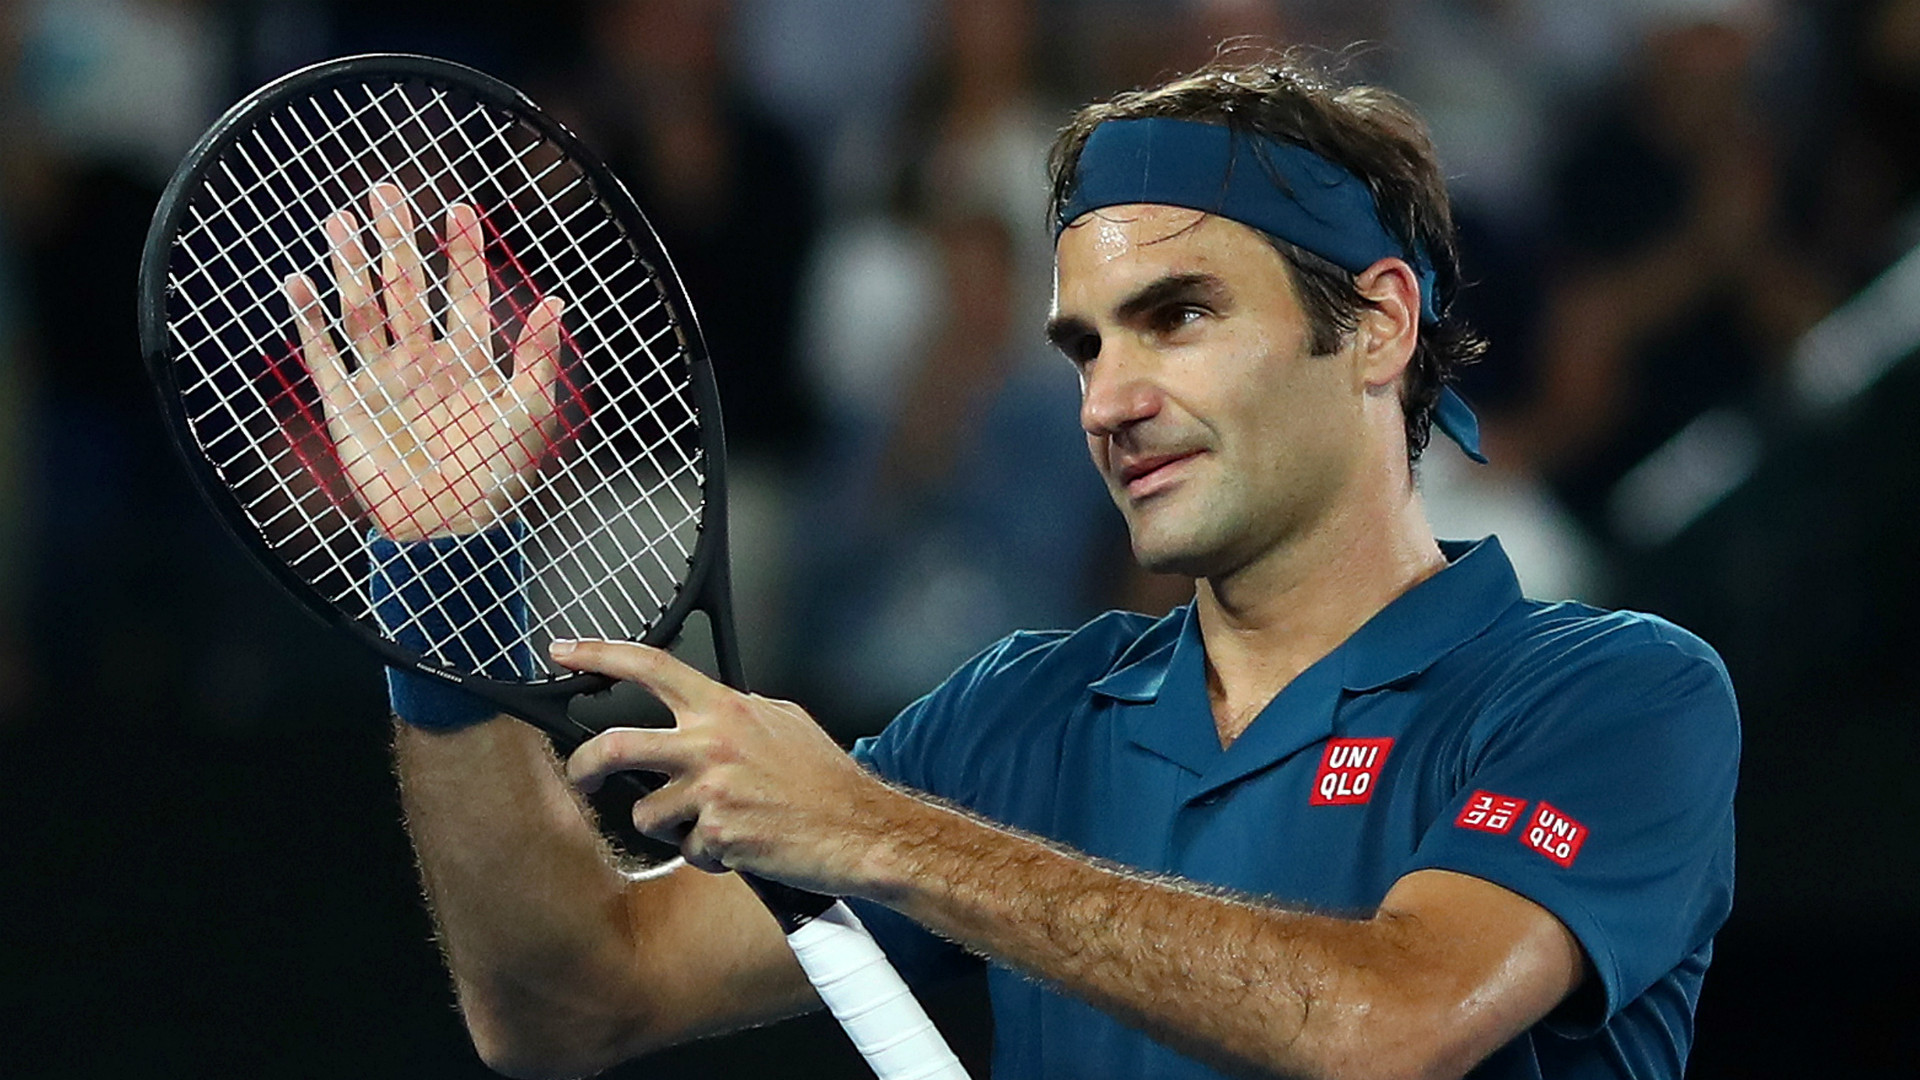 Roger Federer will play in the Madrid Open after deciding to end his clay-court absence this season.